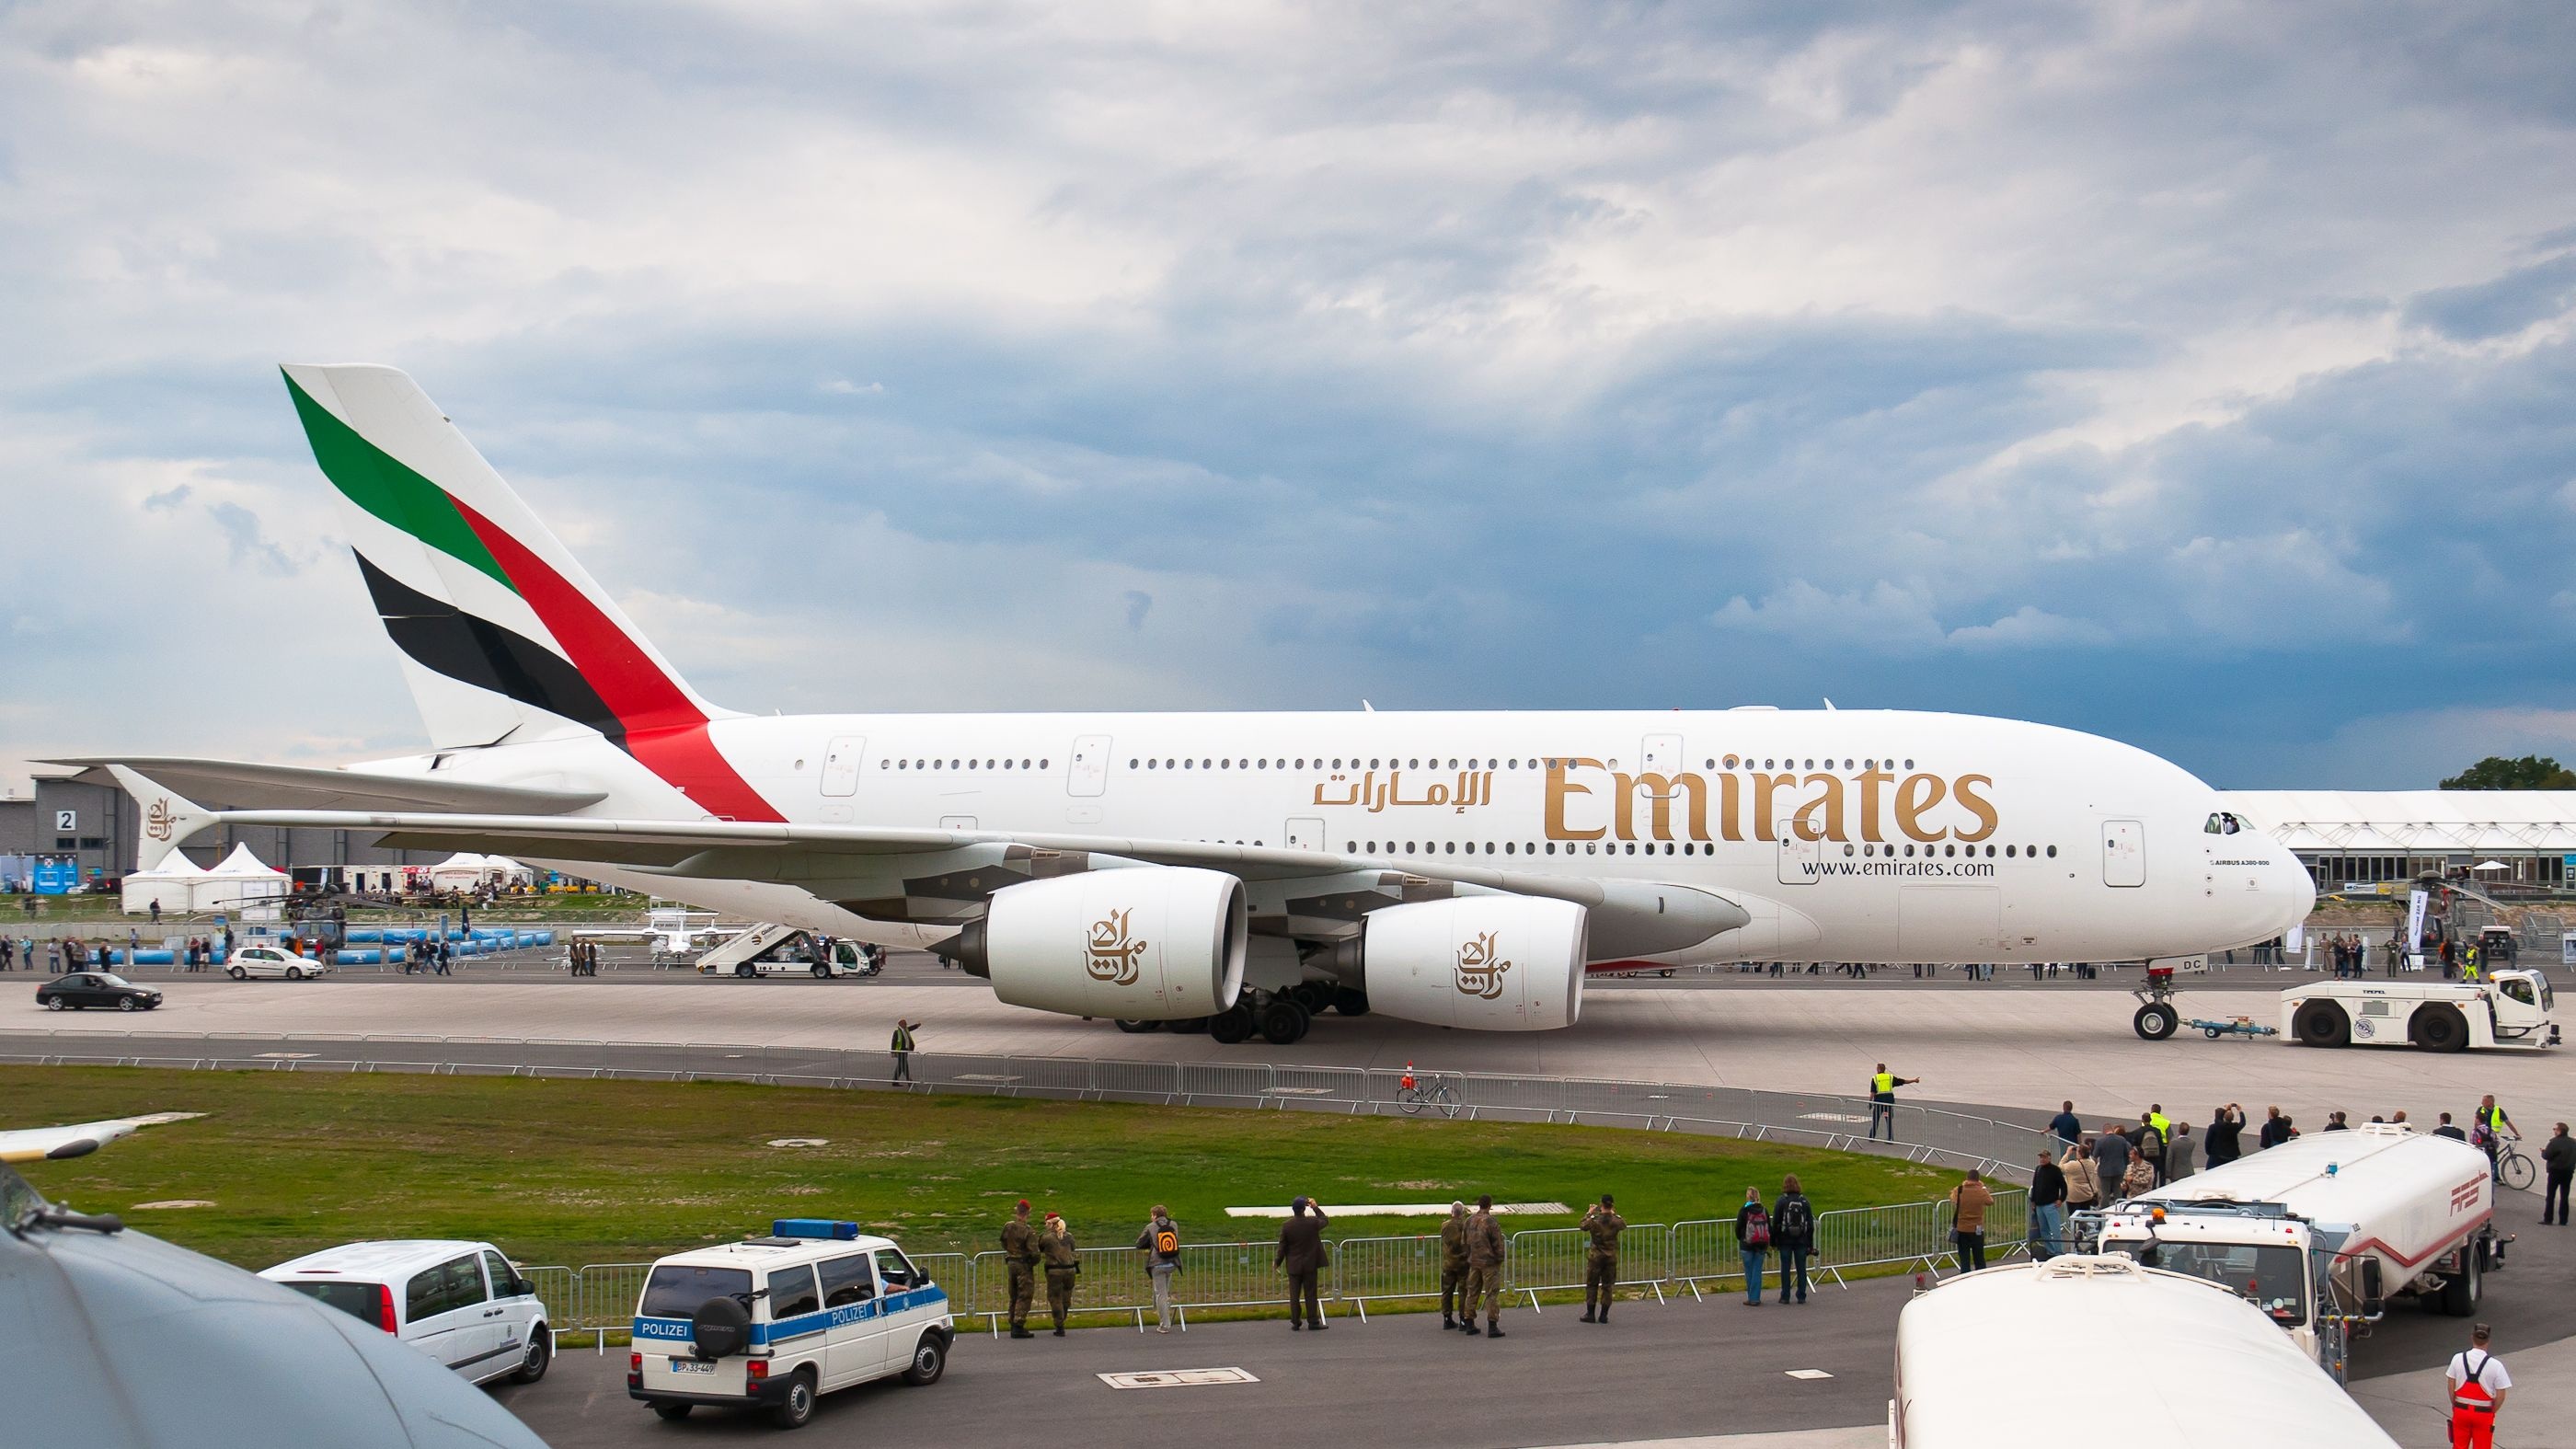 Emirates Airline, Infinite flying, Air travel inspiration, Incredible experiences, 2800x1580 HD Desktop